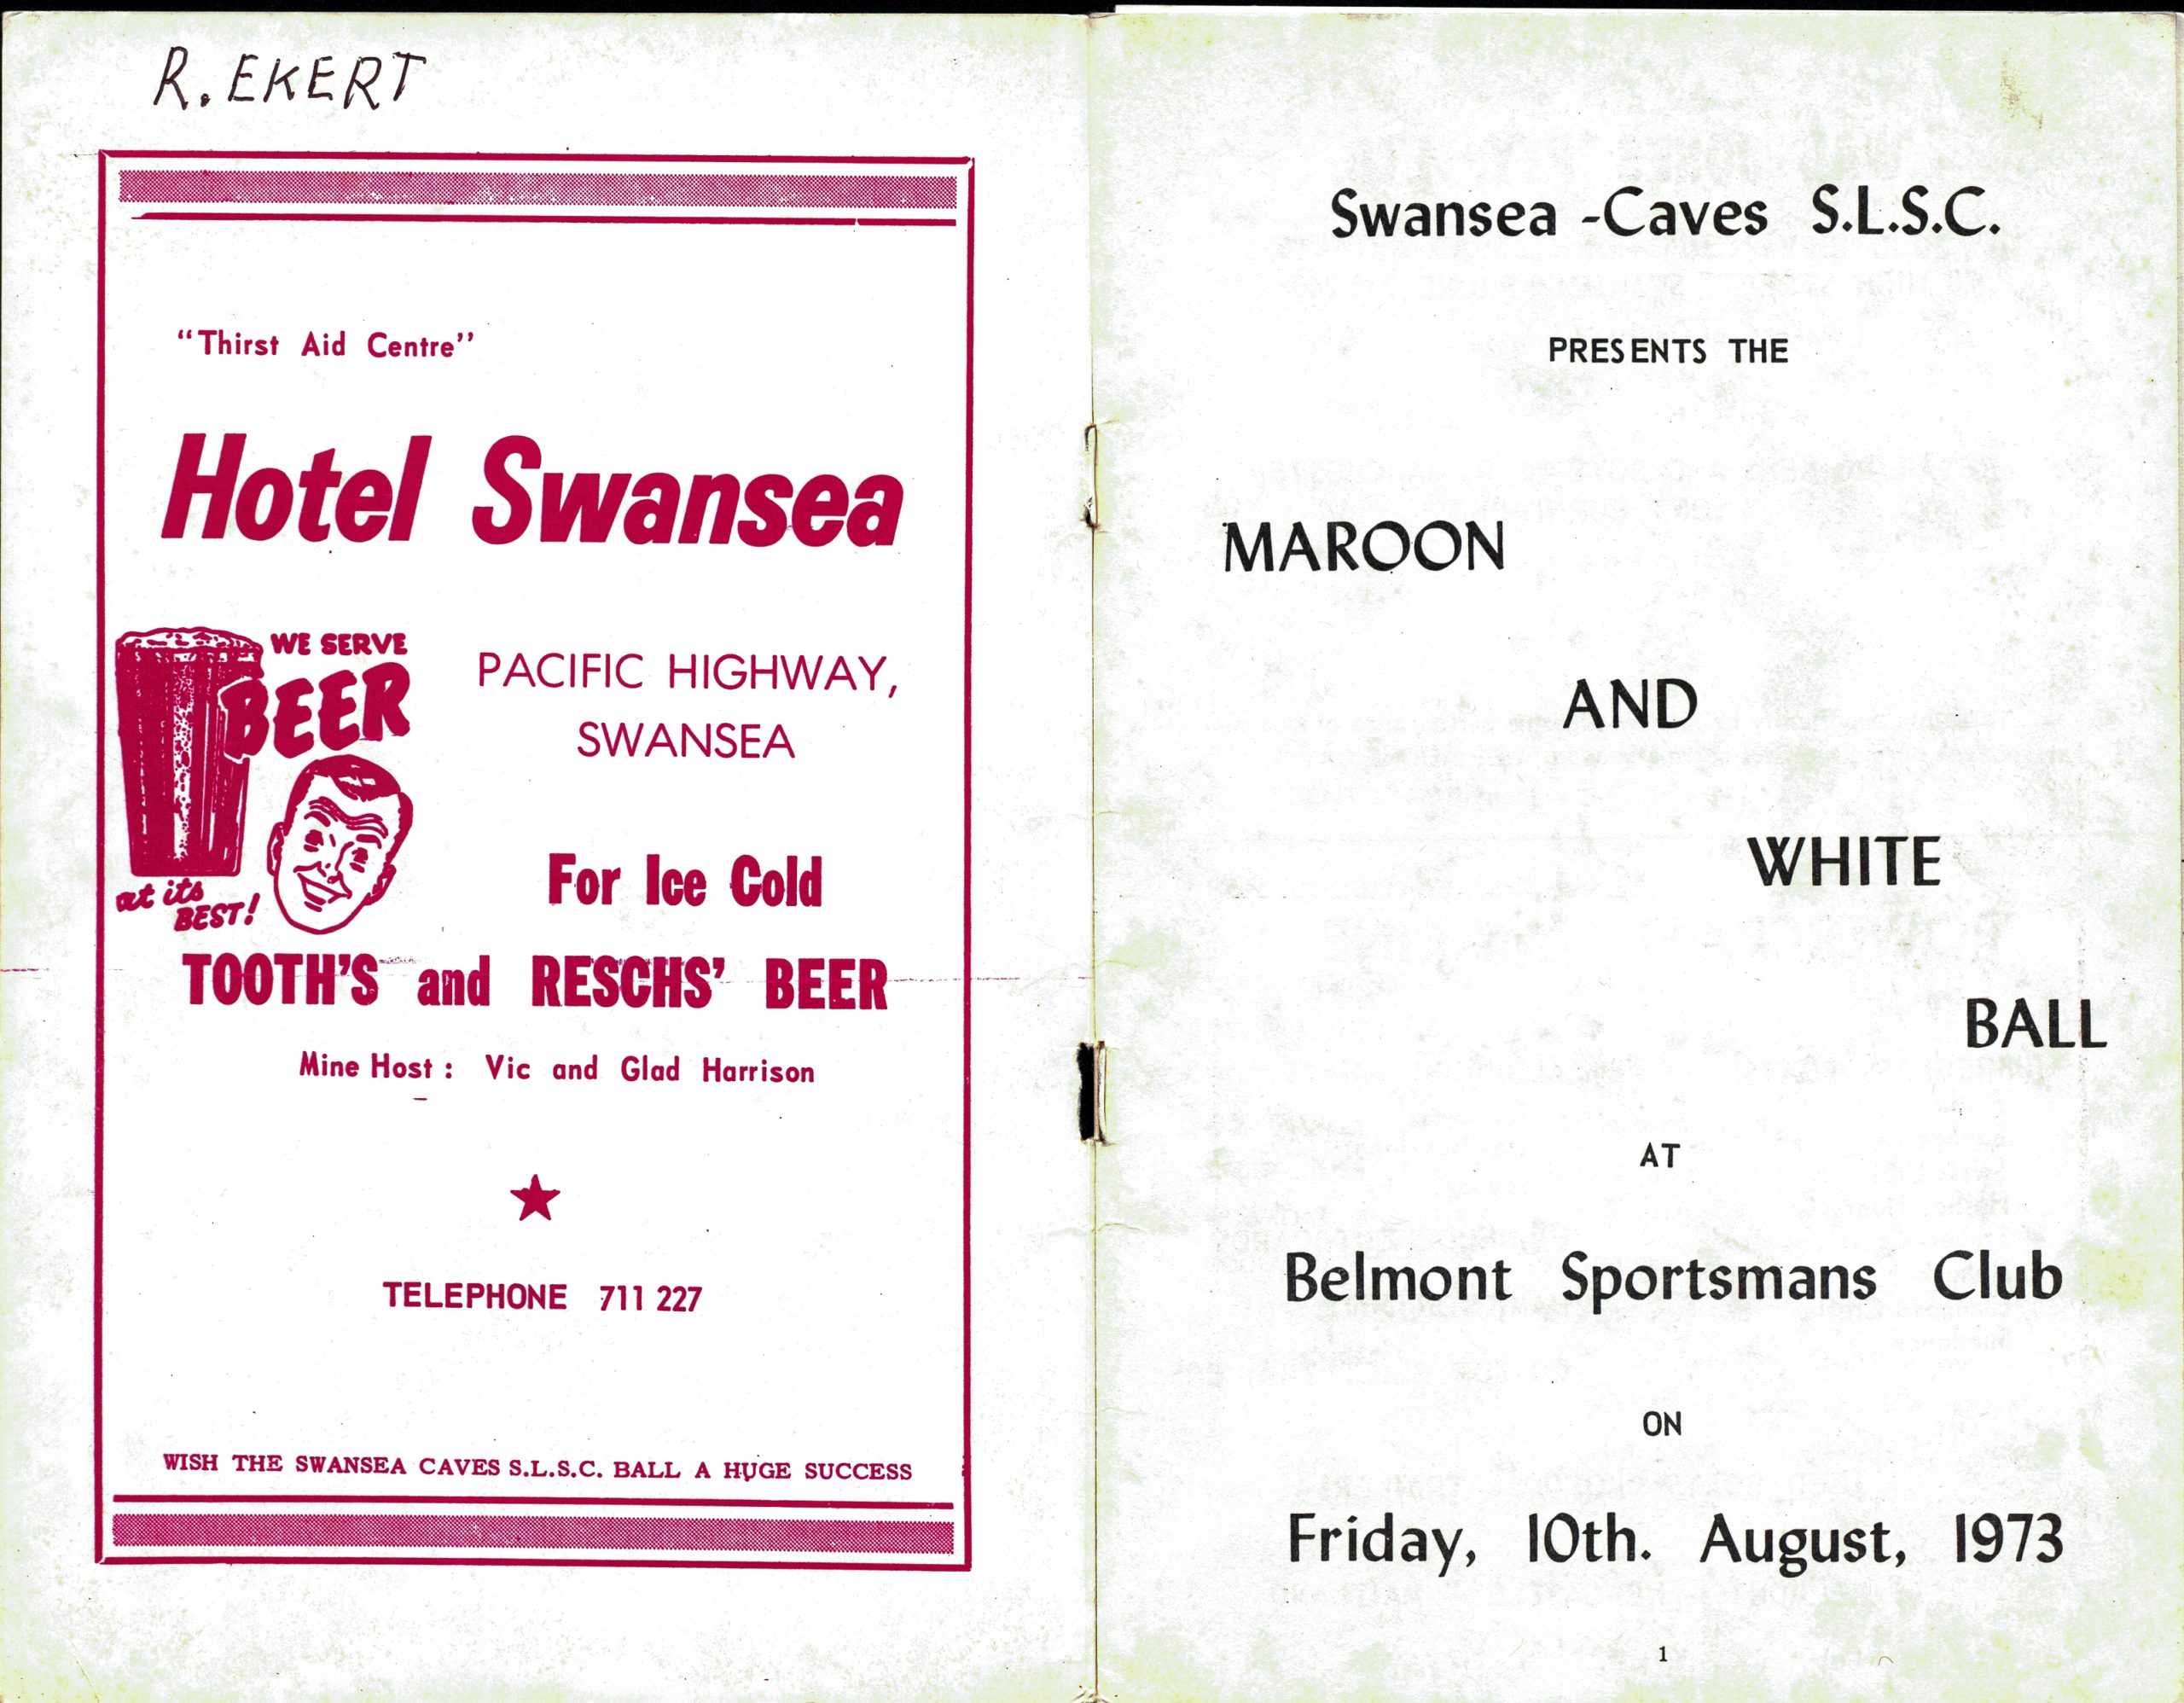 Programme pages with an advertisement for Hotel Swansea in red, followed by blacl text which reads: "Swansea-Caves S.L.S.C. PRESENTS THE MAROON AND WHITE BALL AT Belmont Sportsmans Clib on Friday, 10th August 1973."